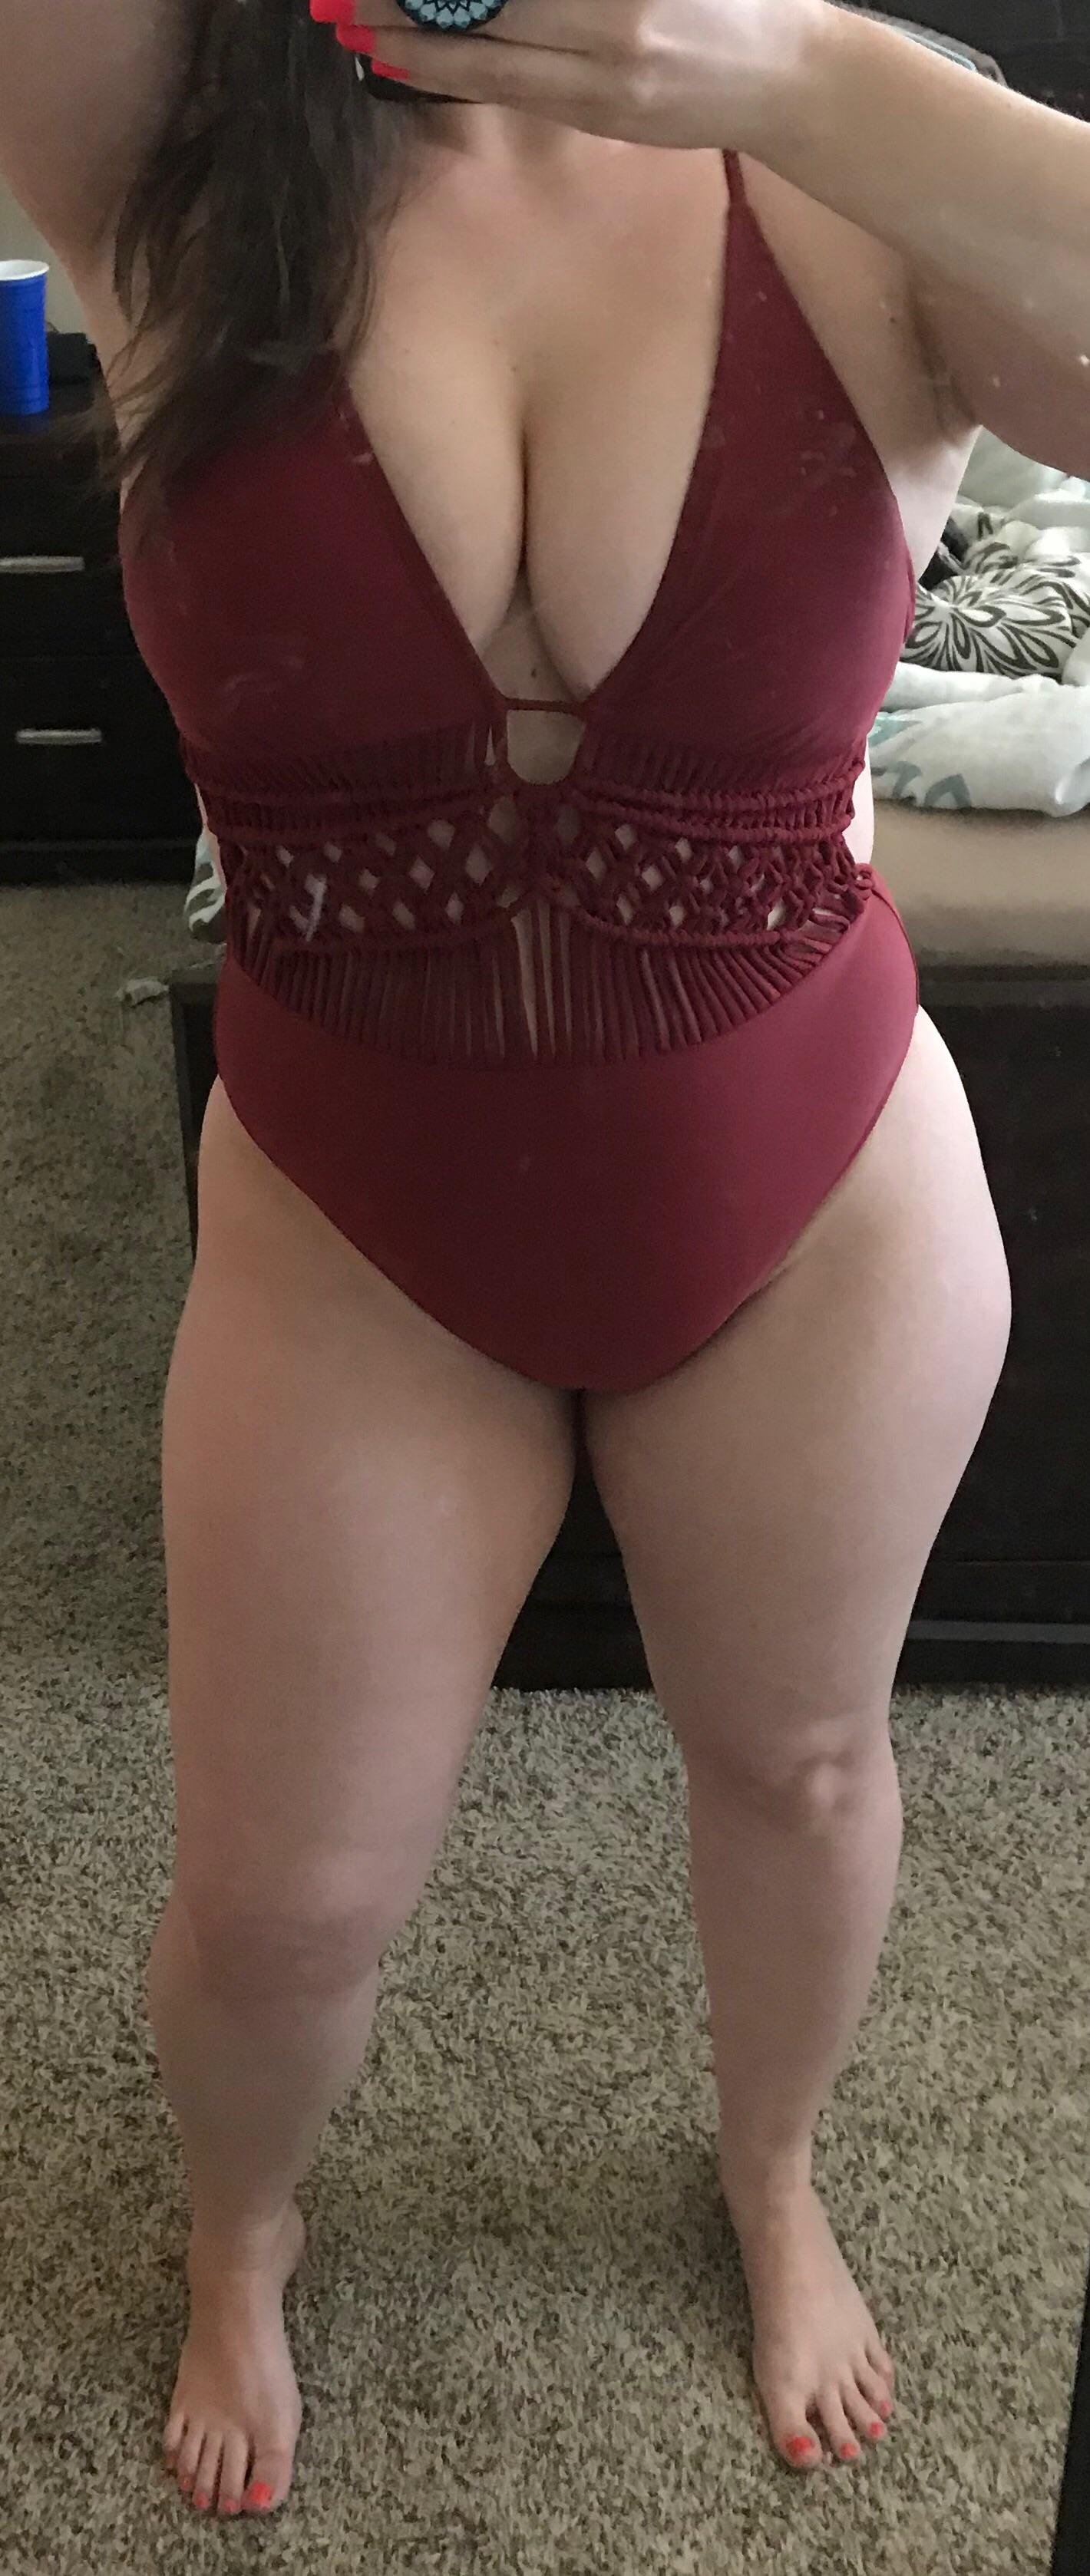 This swimsuit really shows off the thighs